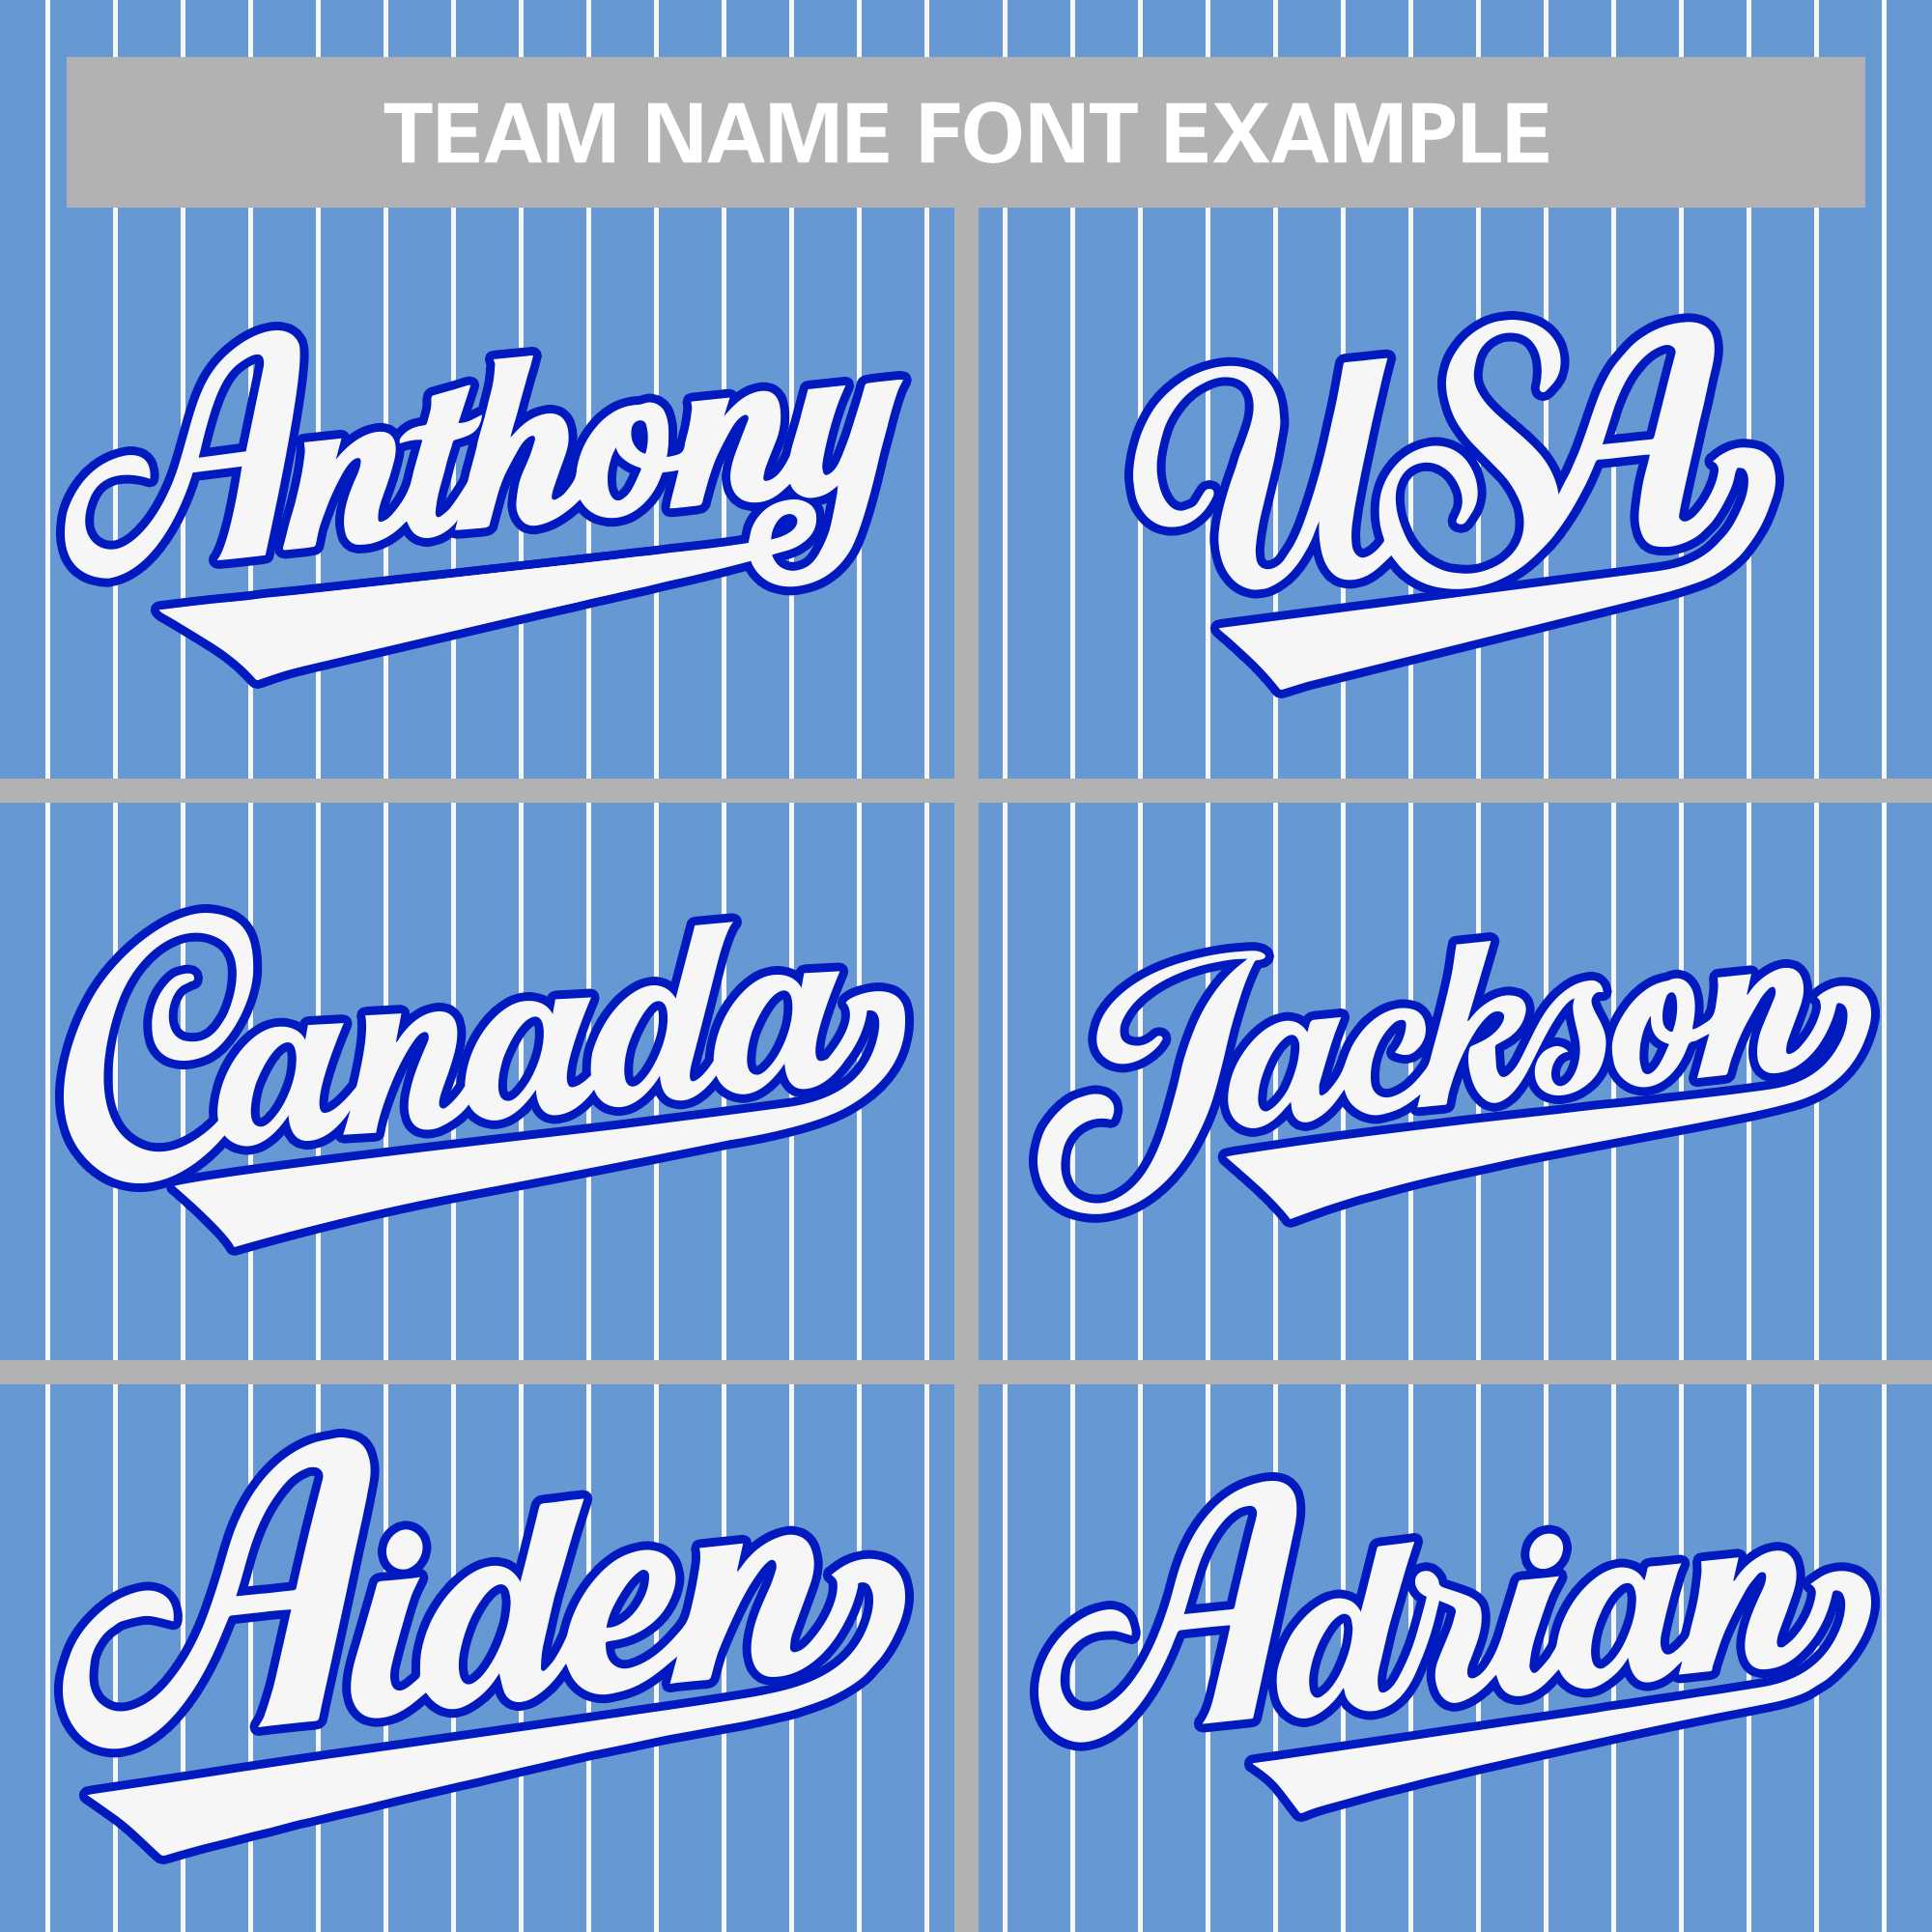 striped button down baseball jersey team name font example